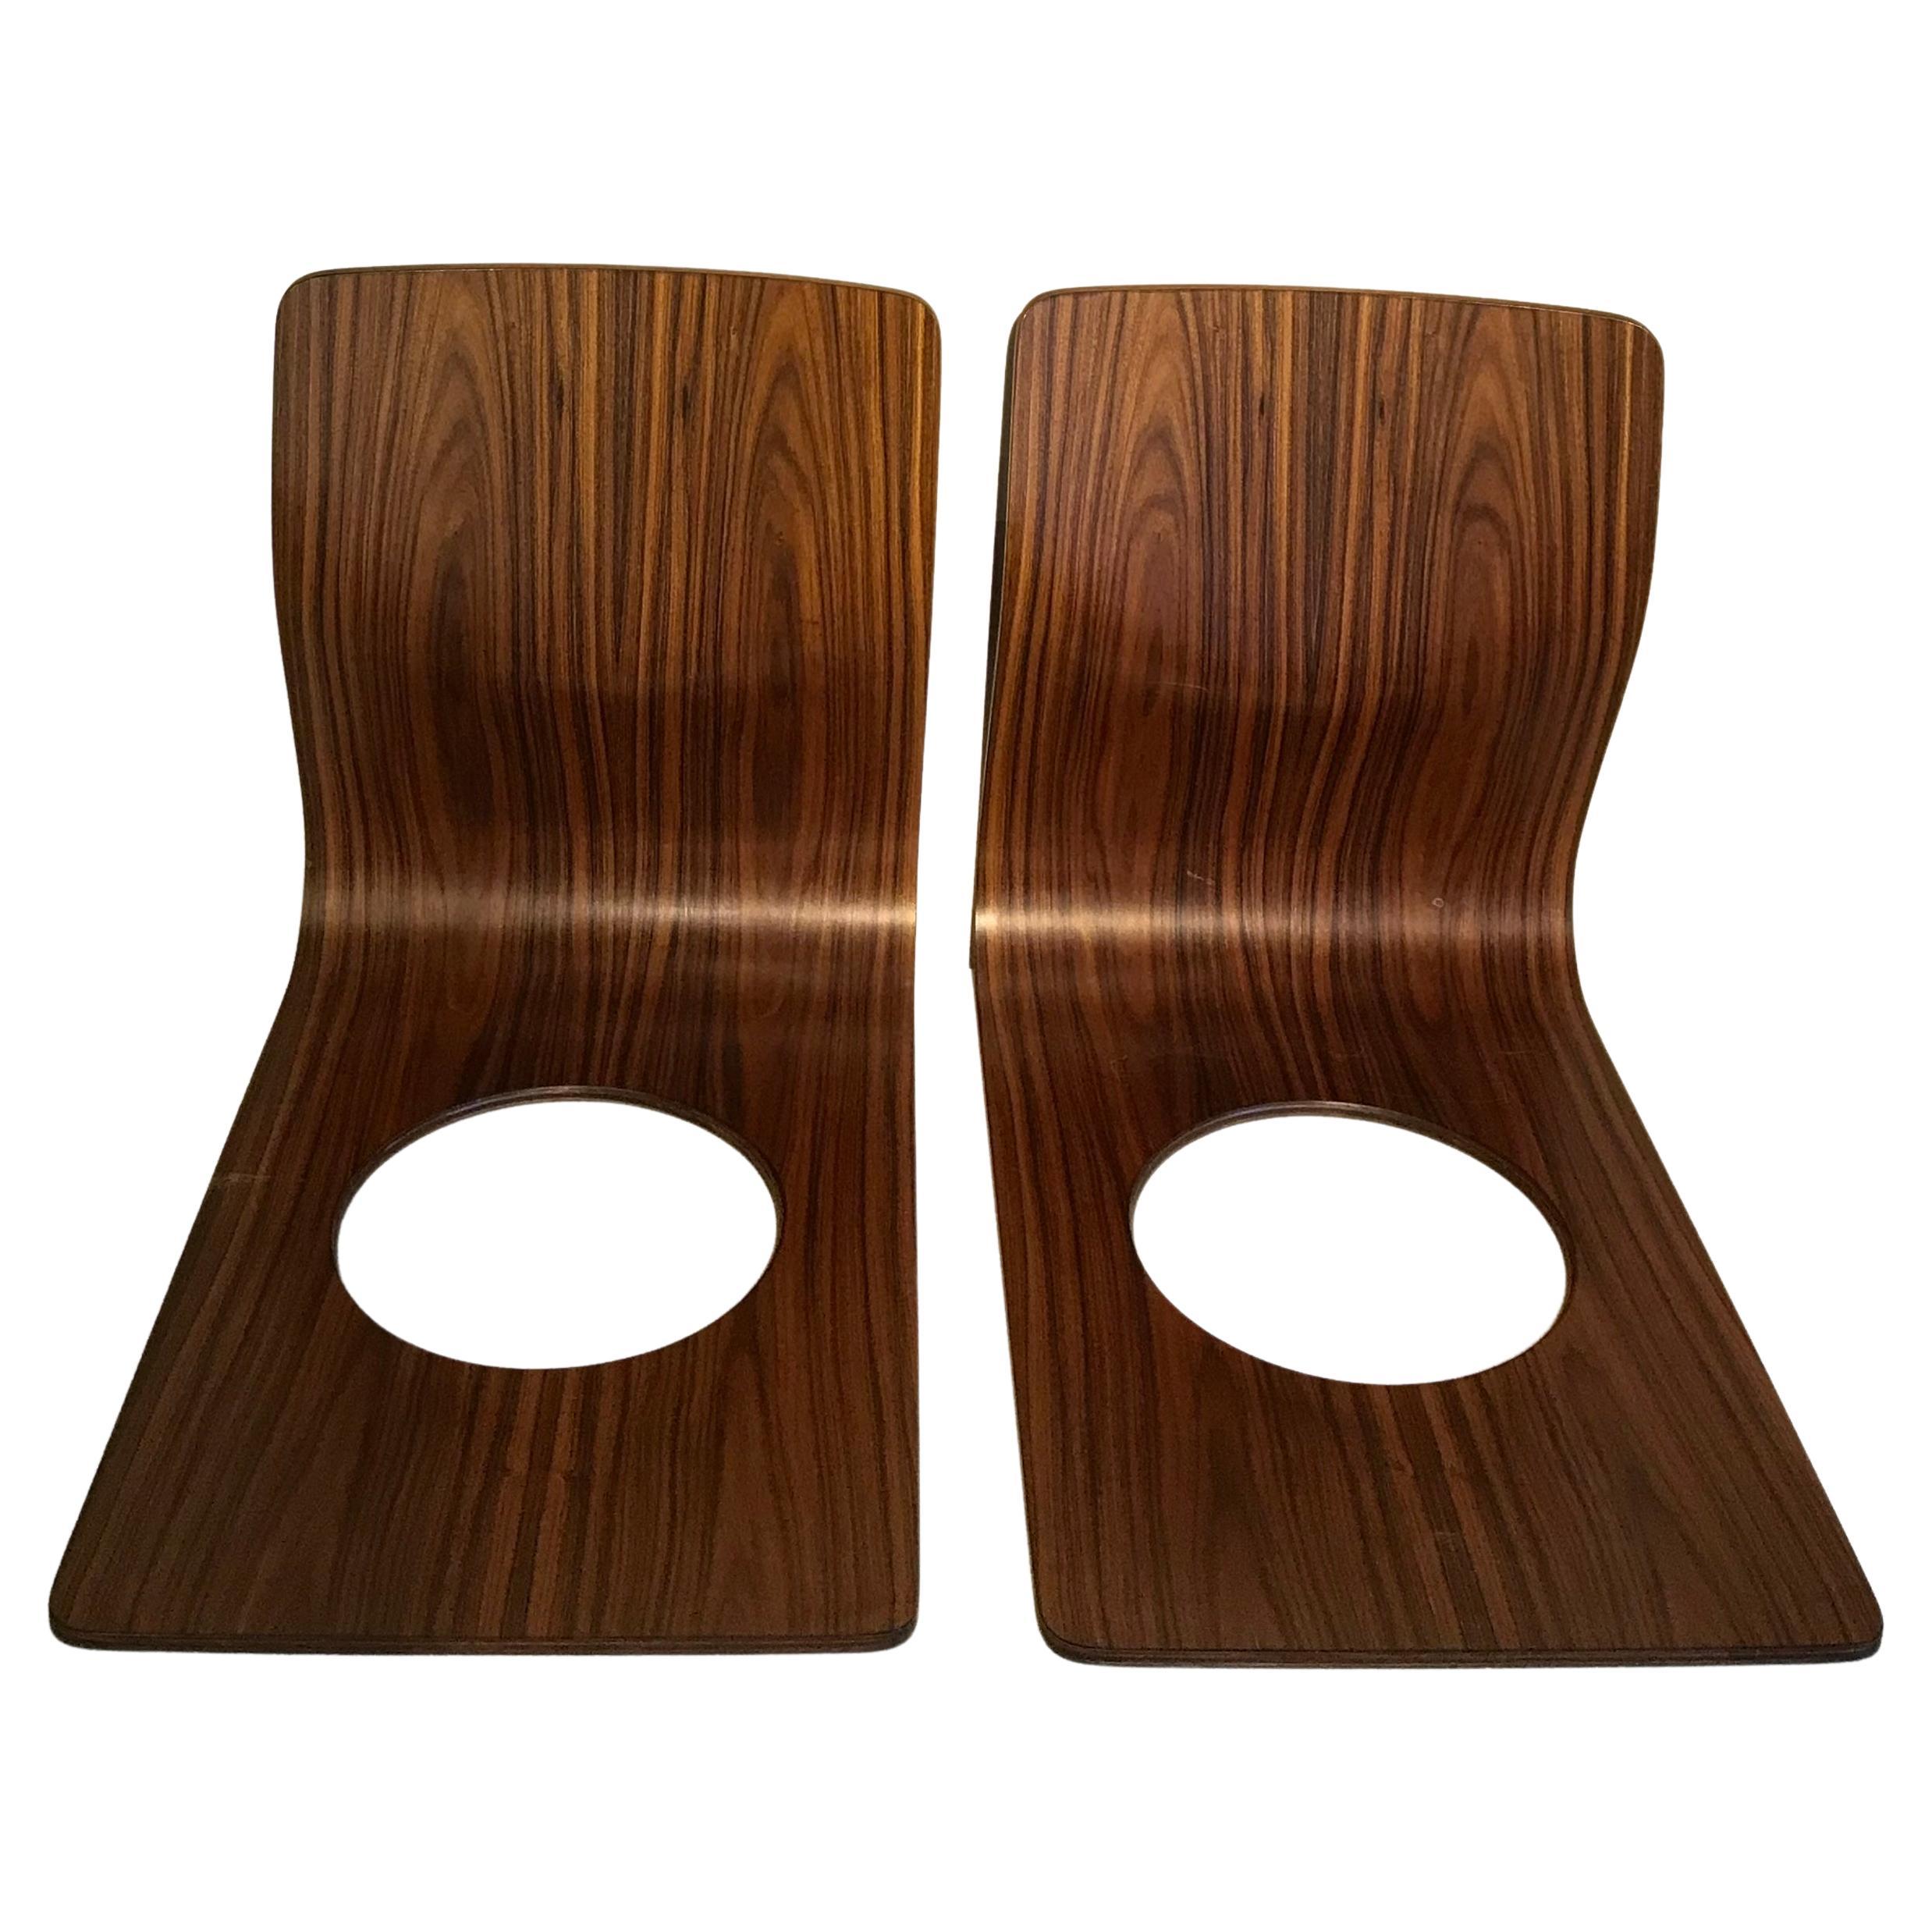 Japanese Style Rosewood Plywood Seats For Sale